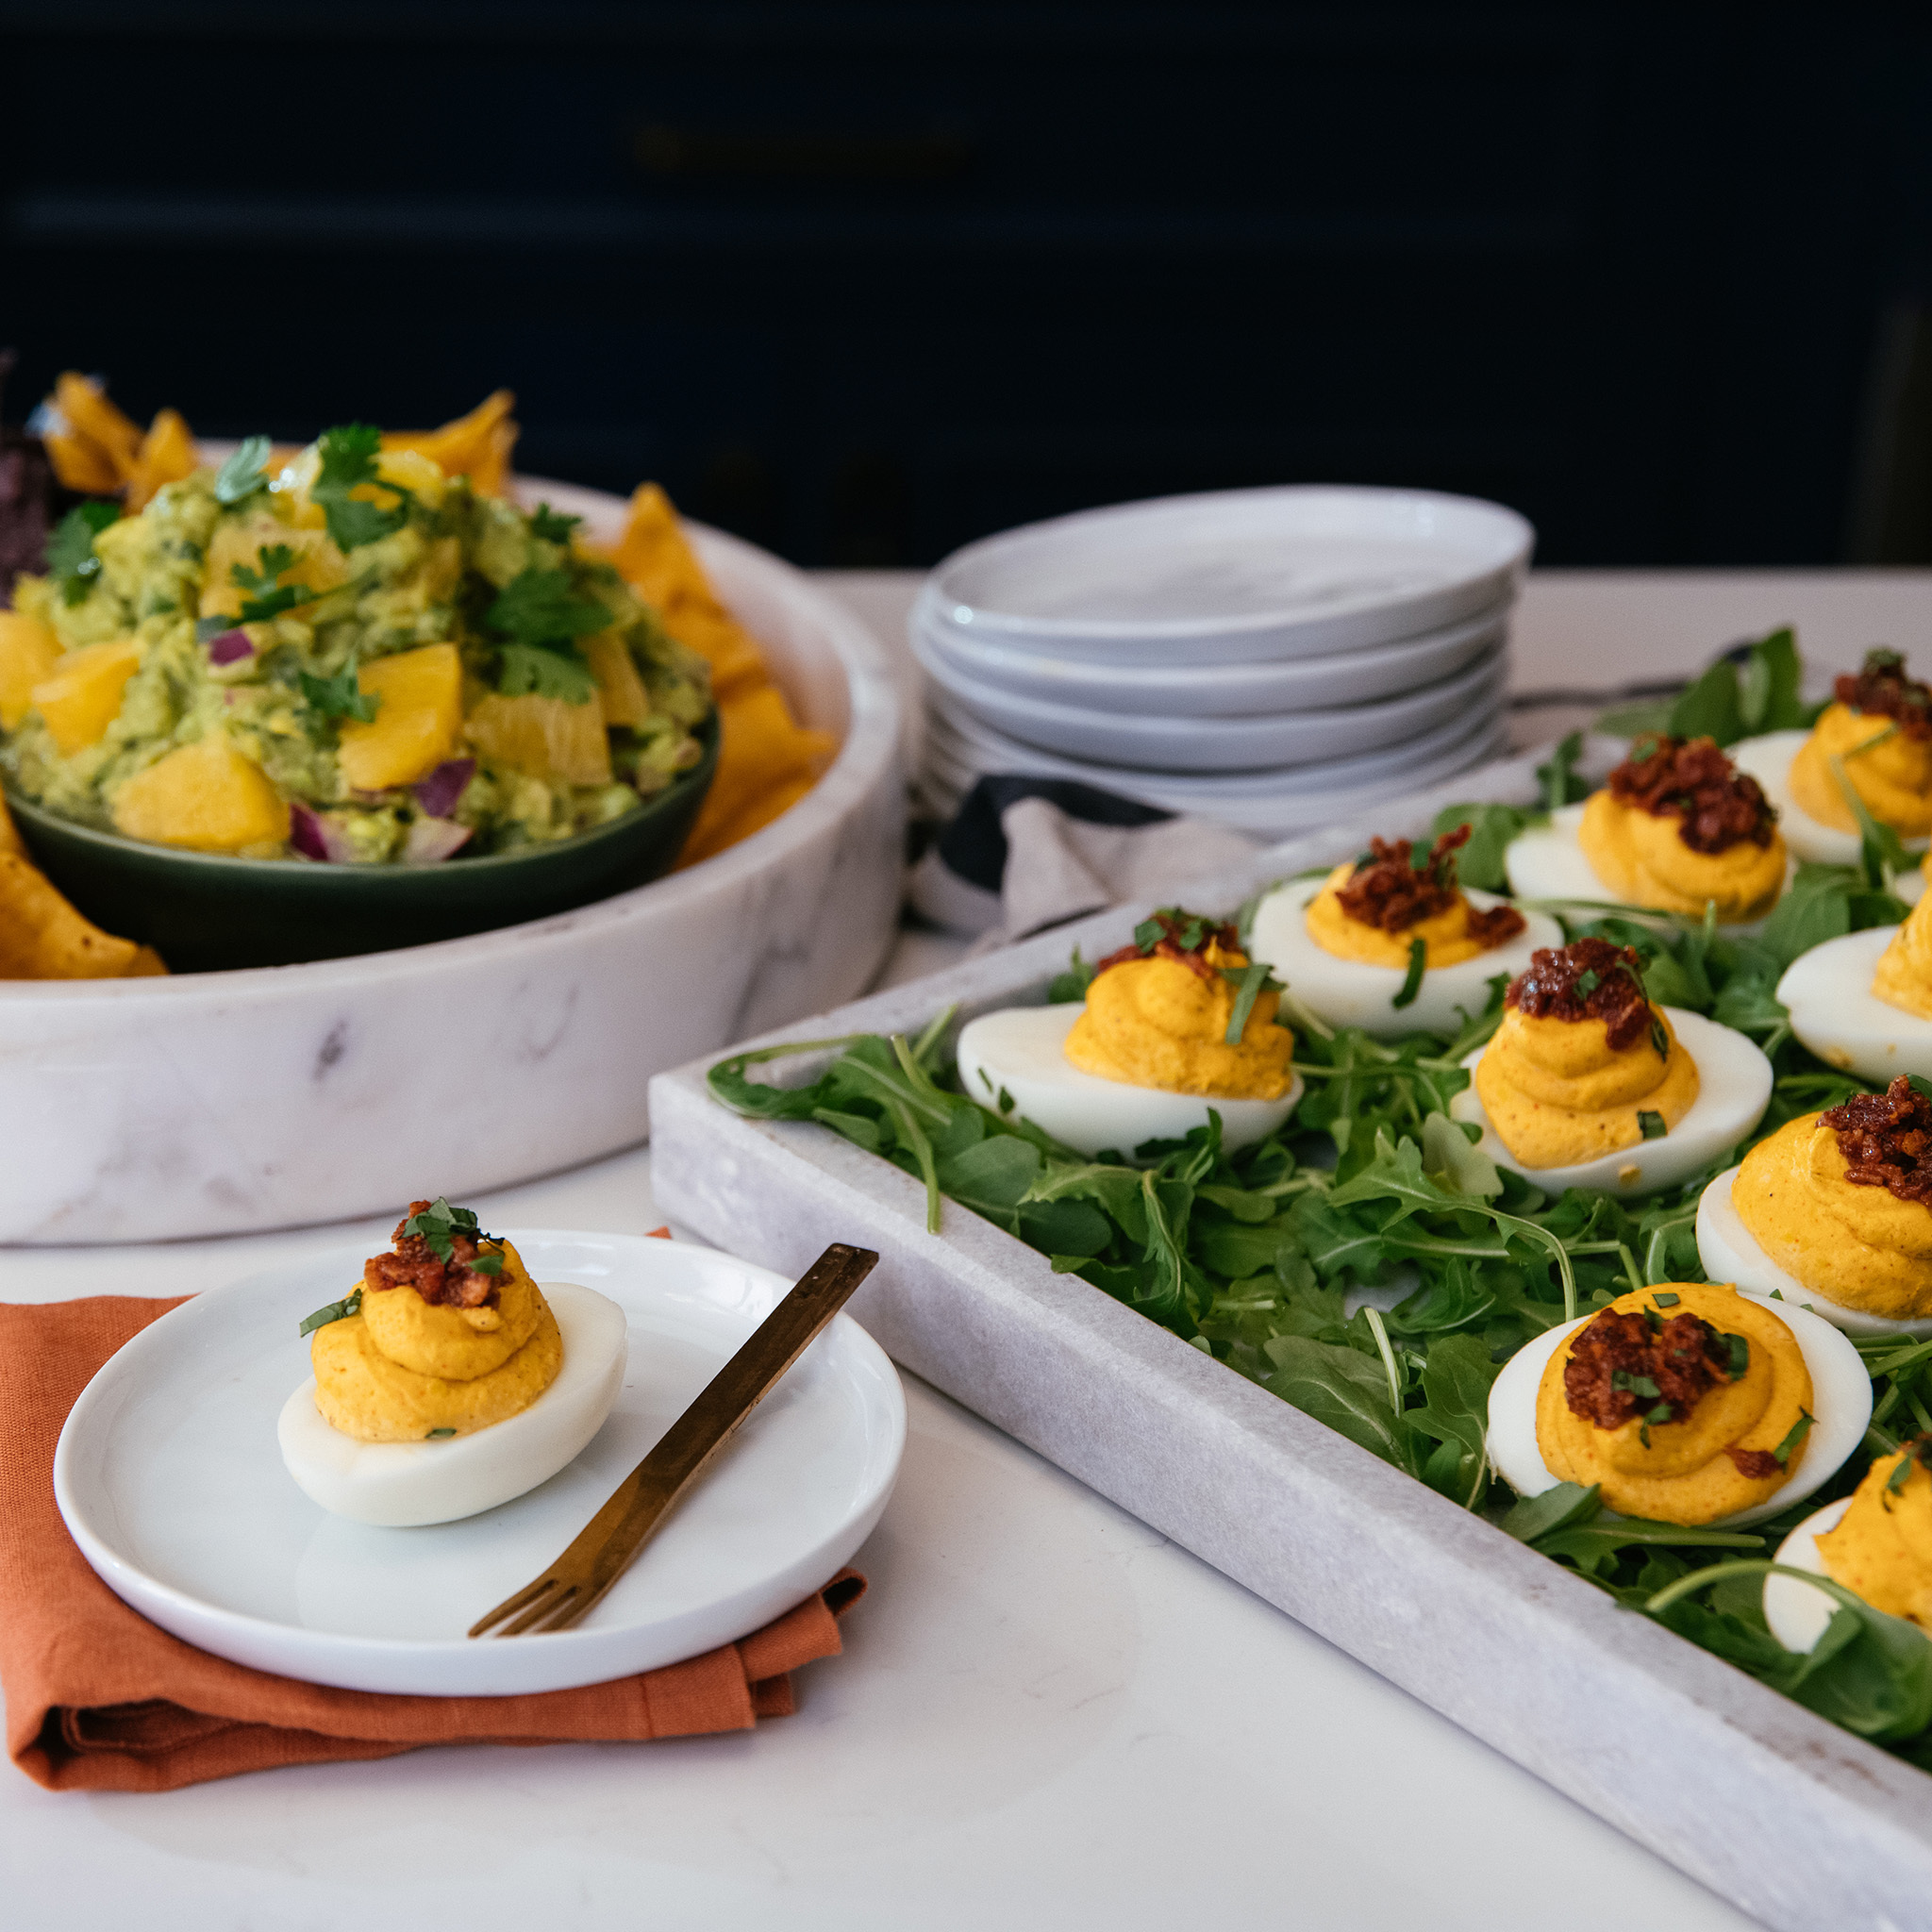 Charles Hunter III's Deviled Eggs with Spicy Bacon